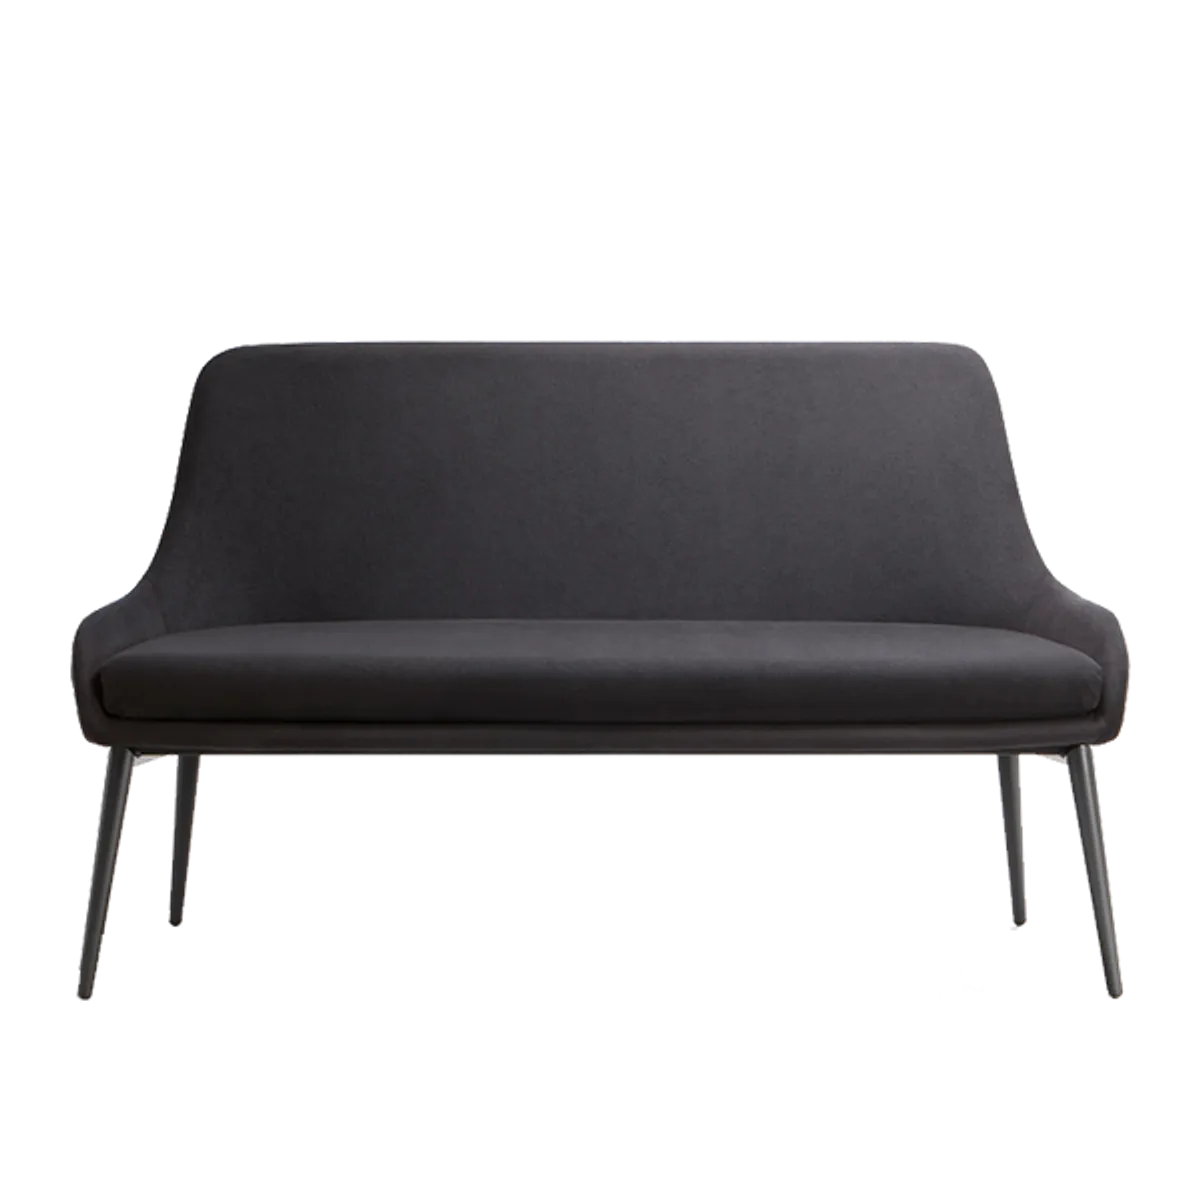 Web Josie 2 Sofa Upholstered Furniture With Metal Legs Black Upholstery Insideoutcontracts